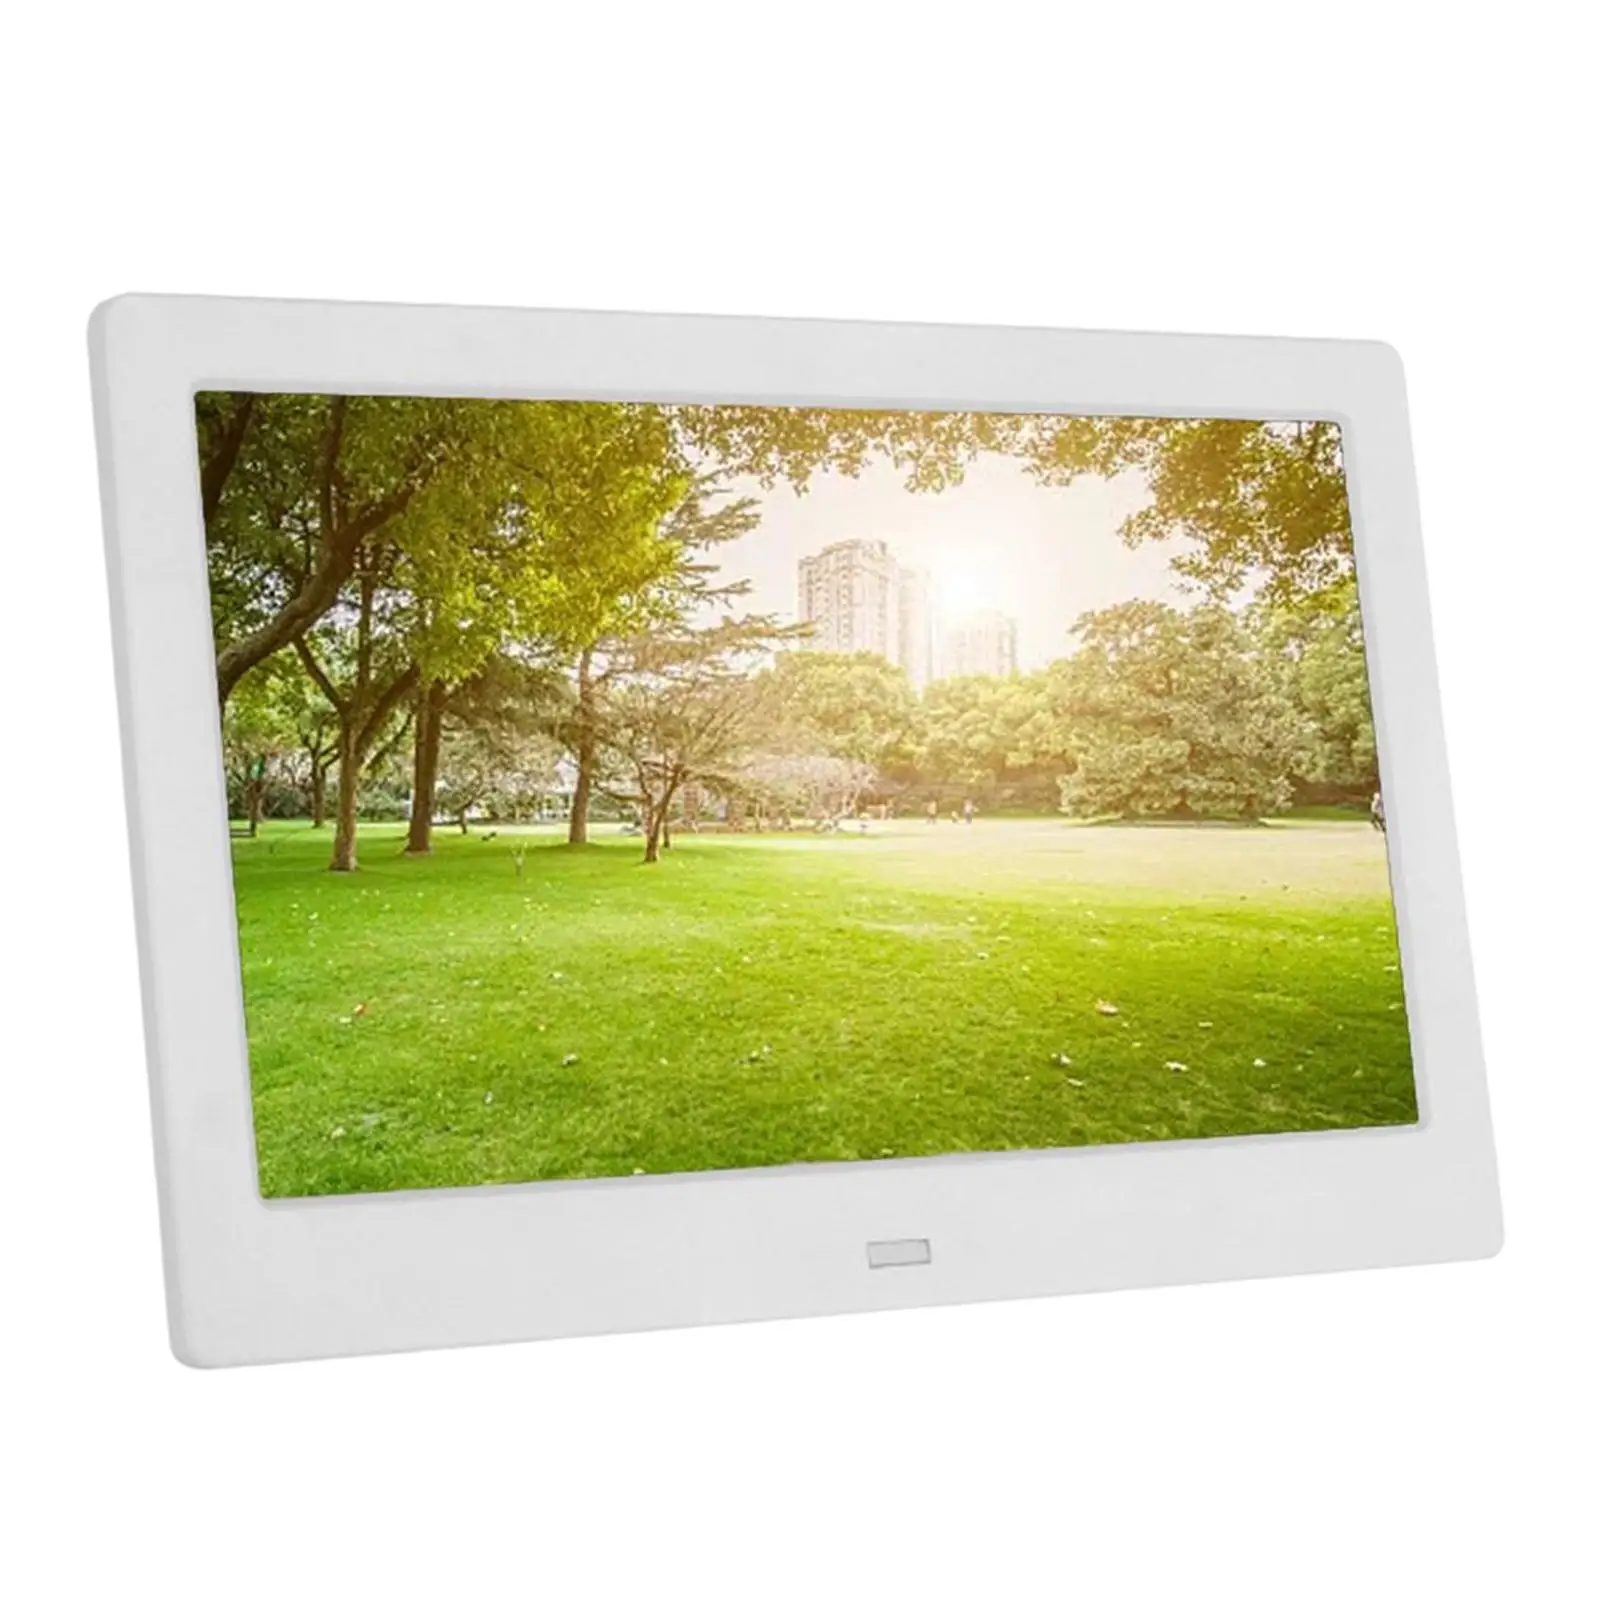 10Inches Electronic Digital Photo Frame White US Standard Professional Multiple Functions with Clock,Calendar Multiple Used